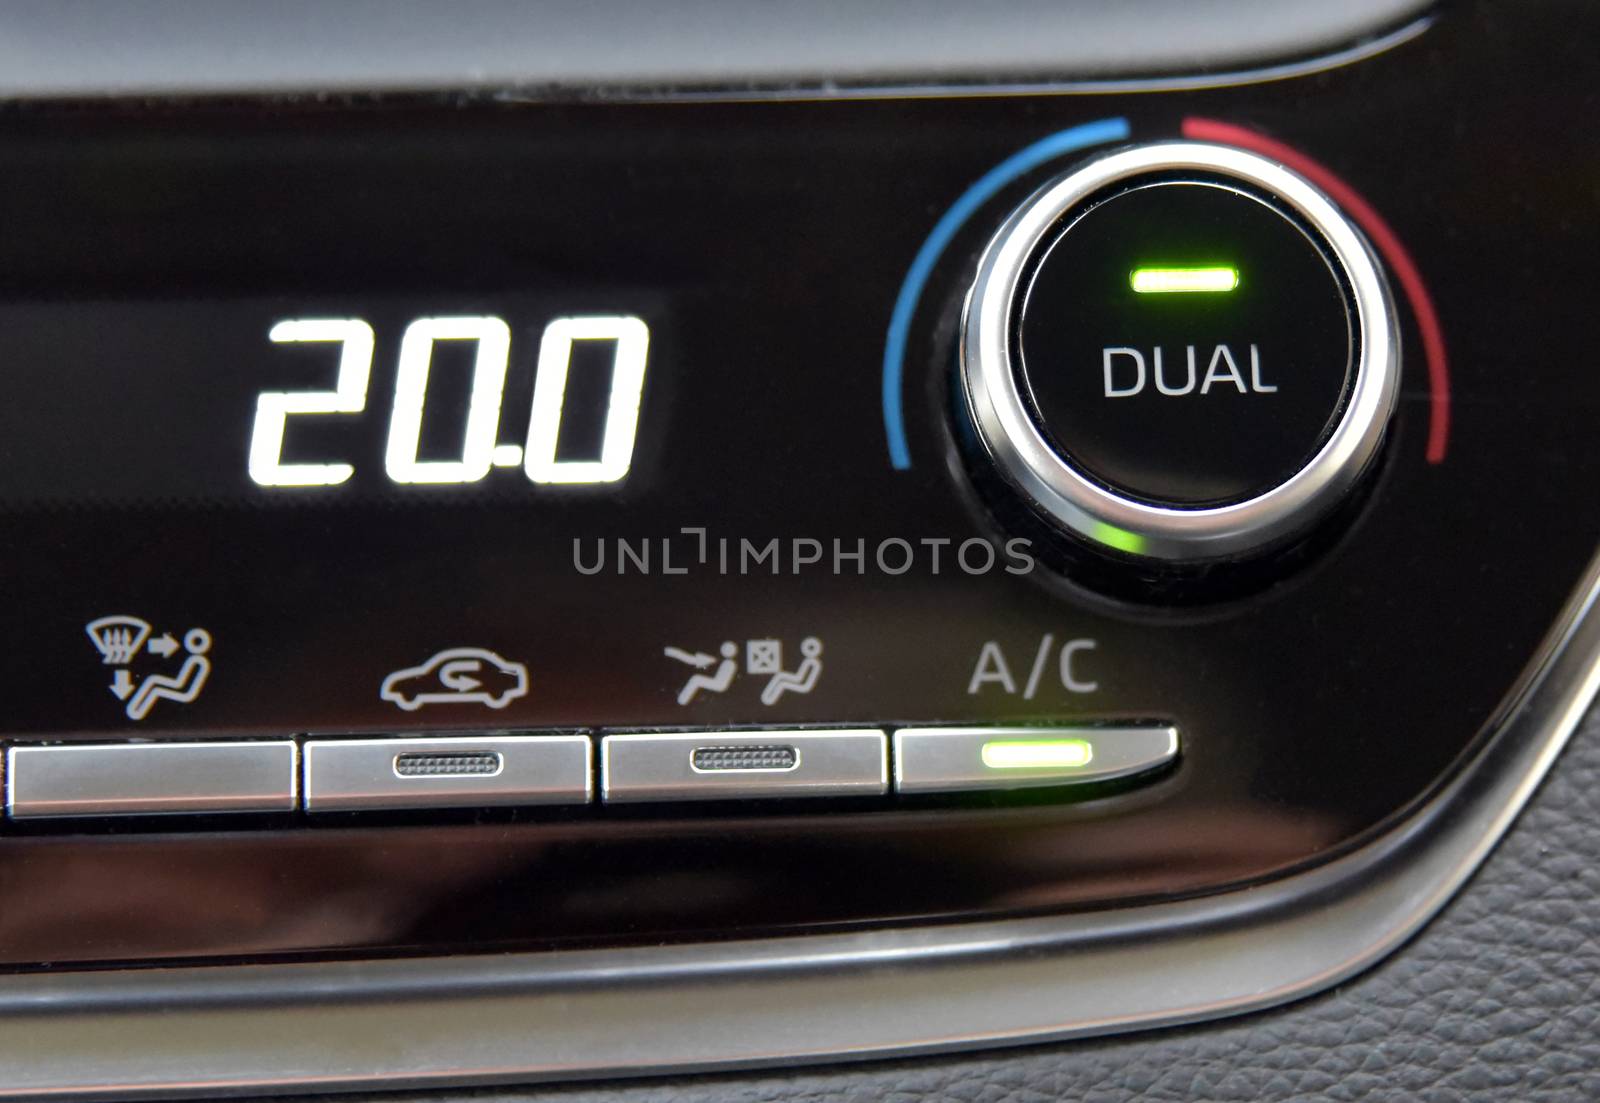 buttons to activate the air conditioning in the car and the temperature gauge